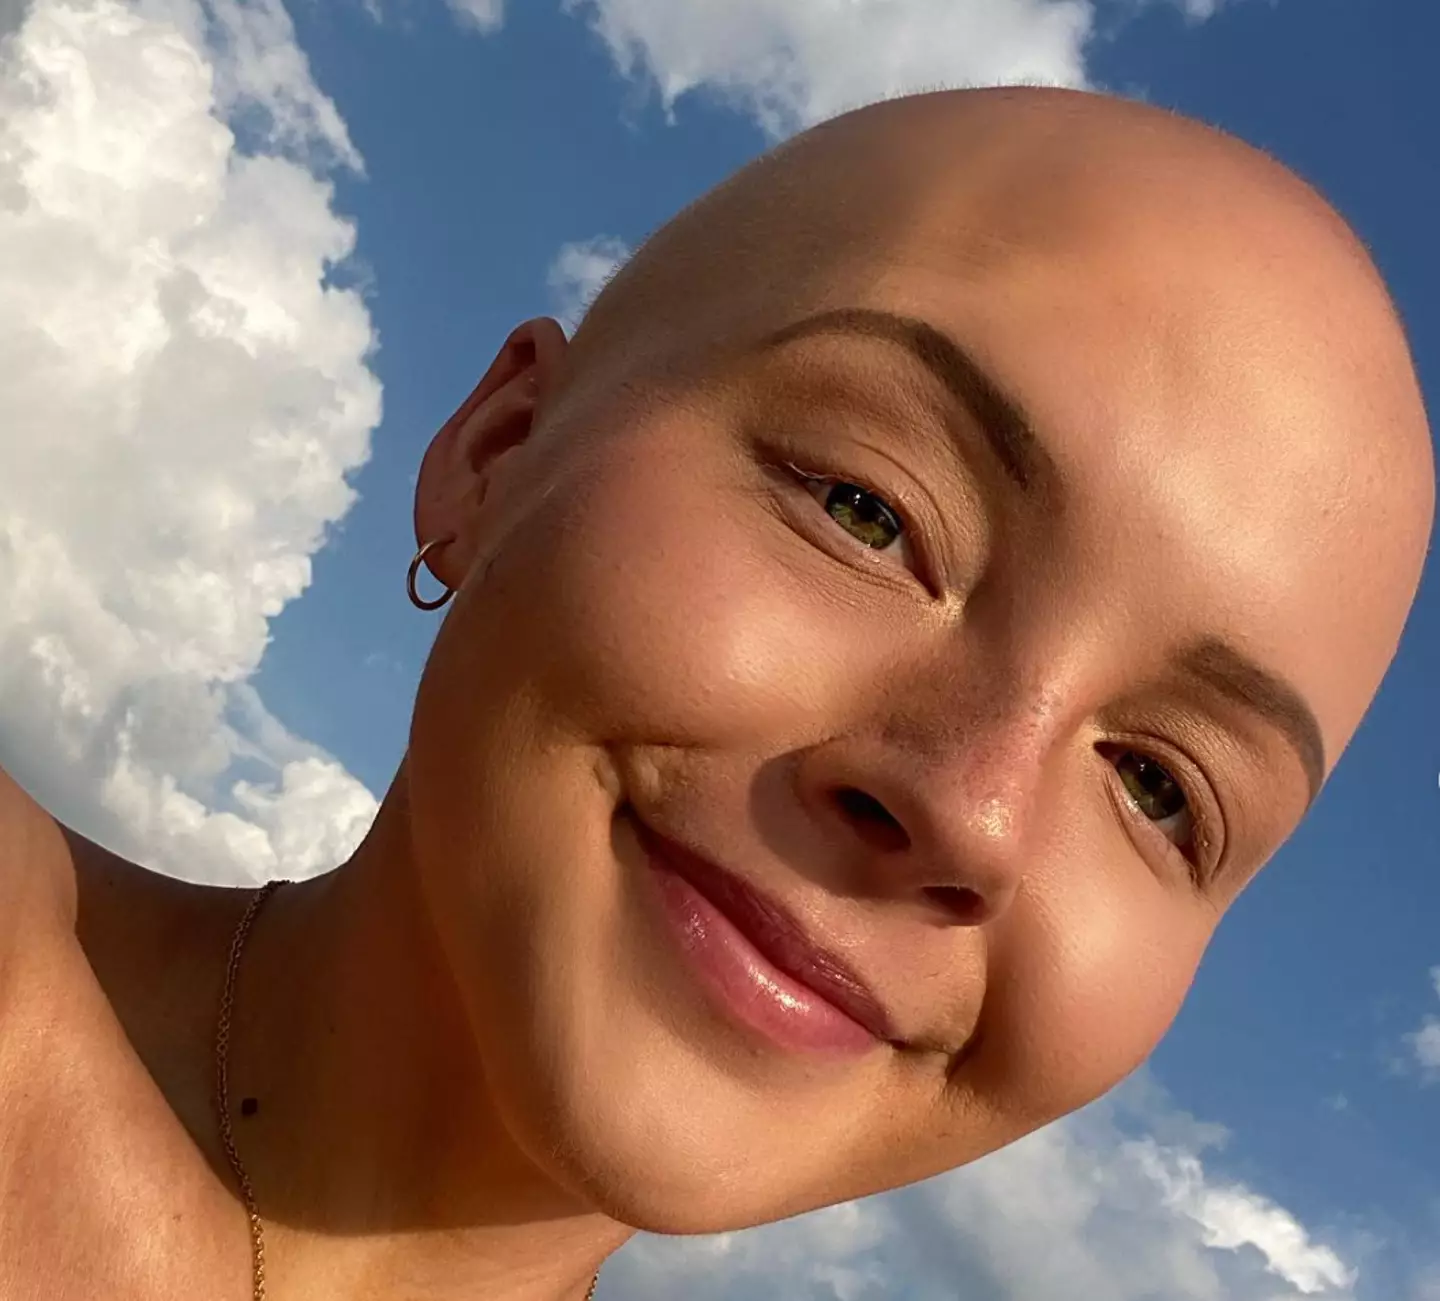 Maddy underwent chemotherapy following her diagnosis. (Instagram/@fruitsnackmaddy)